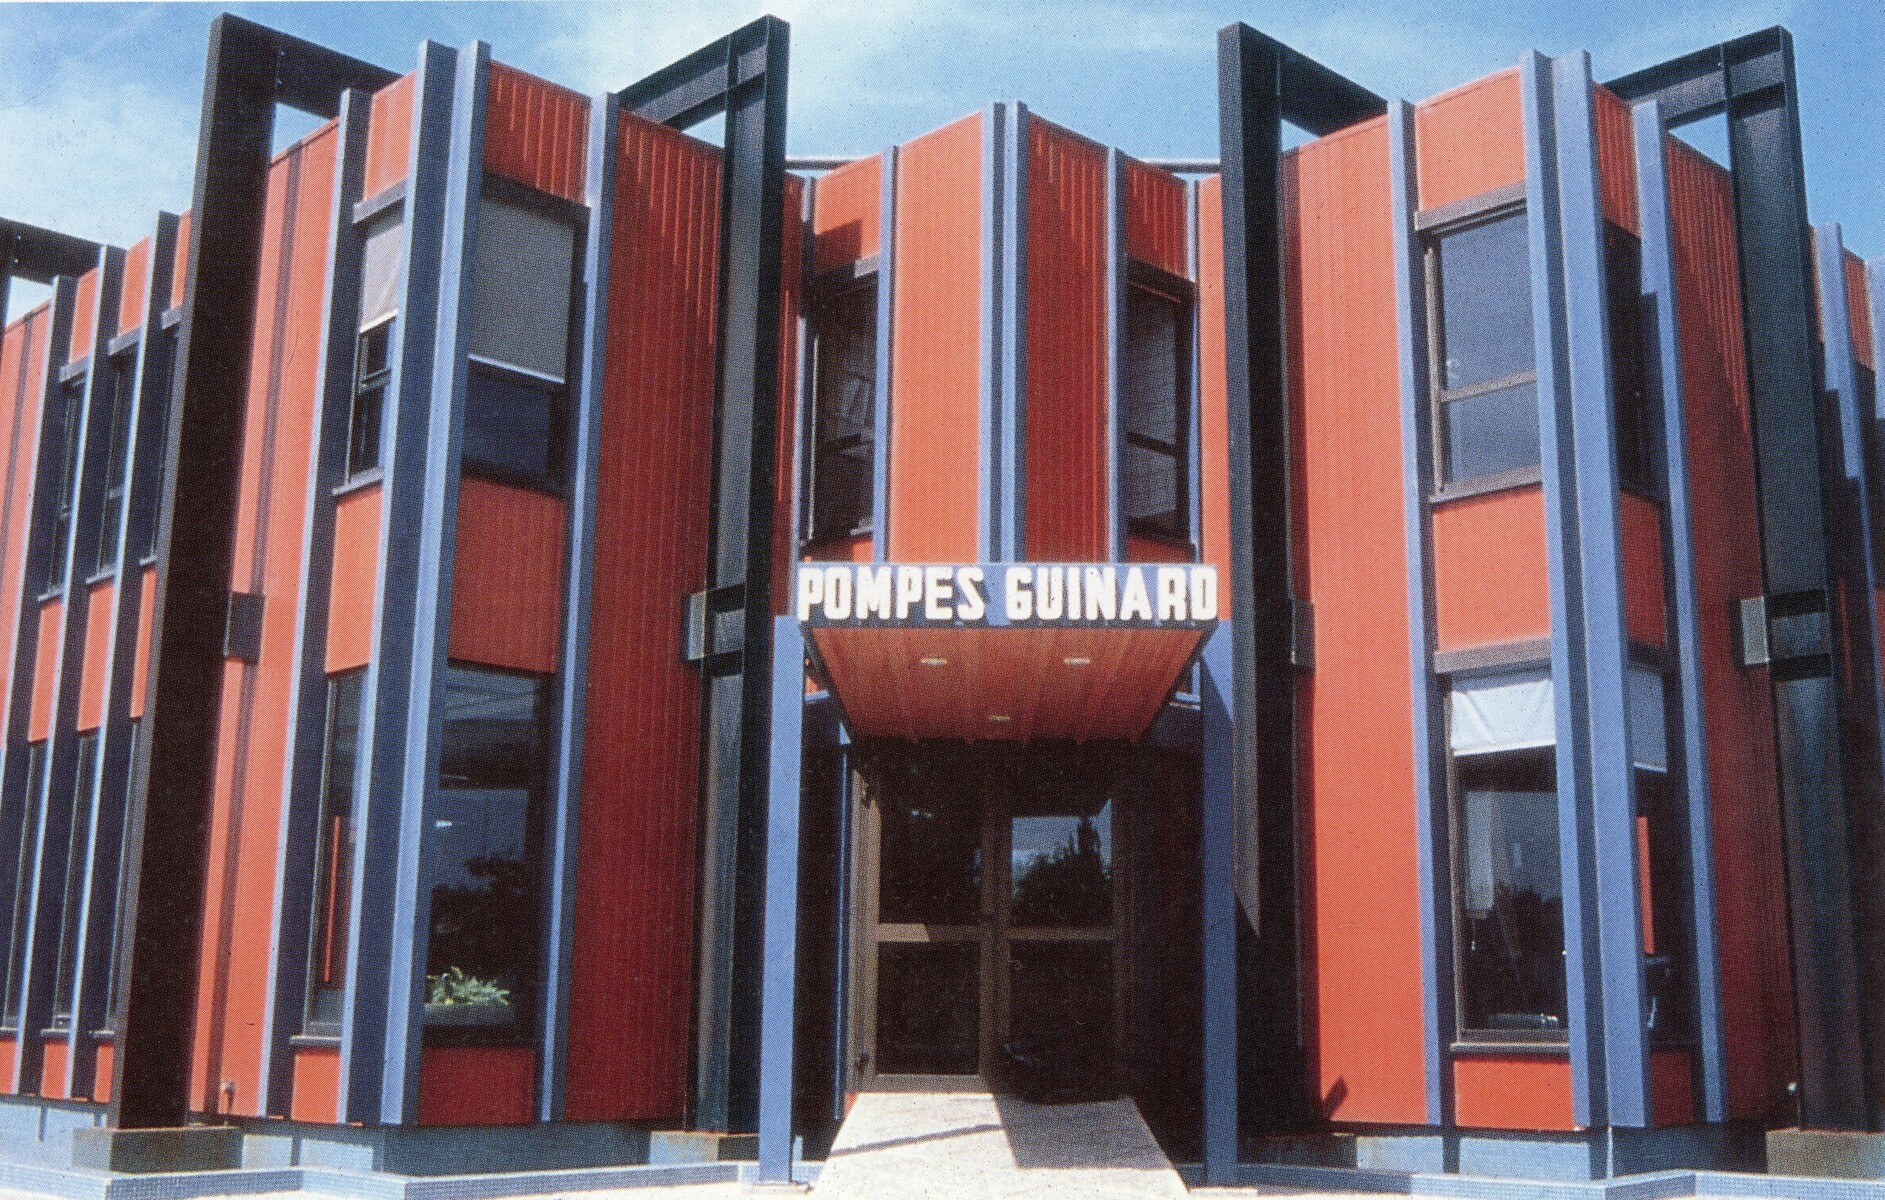 Main entrance at the Pompes Guinard plant in Neuvy-Saint-Sépluchre near Châteauroux